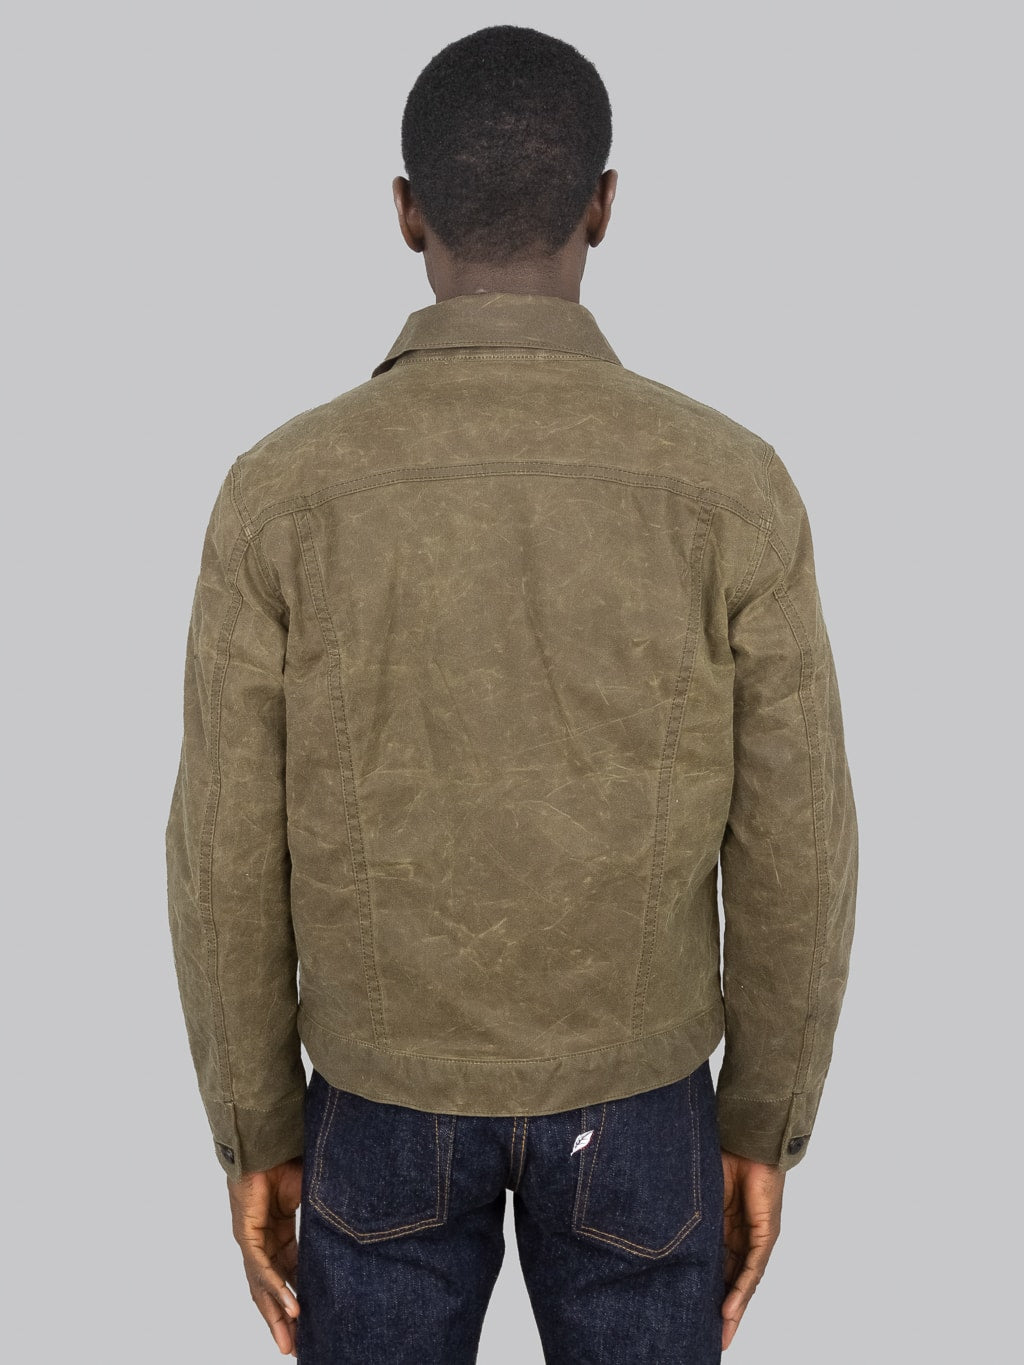 Rogue Territory Supply Jacket Lined Brown Ridgeline model back fit